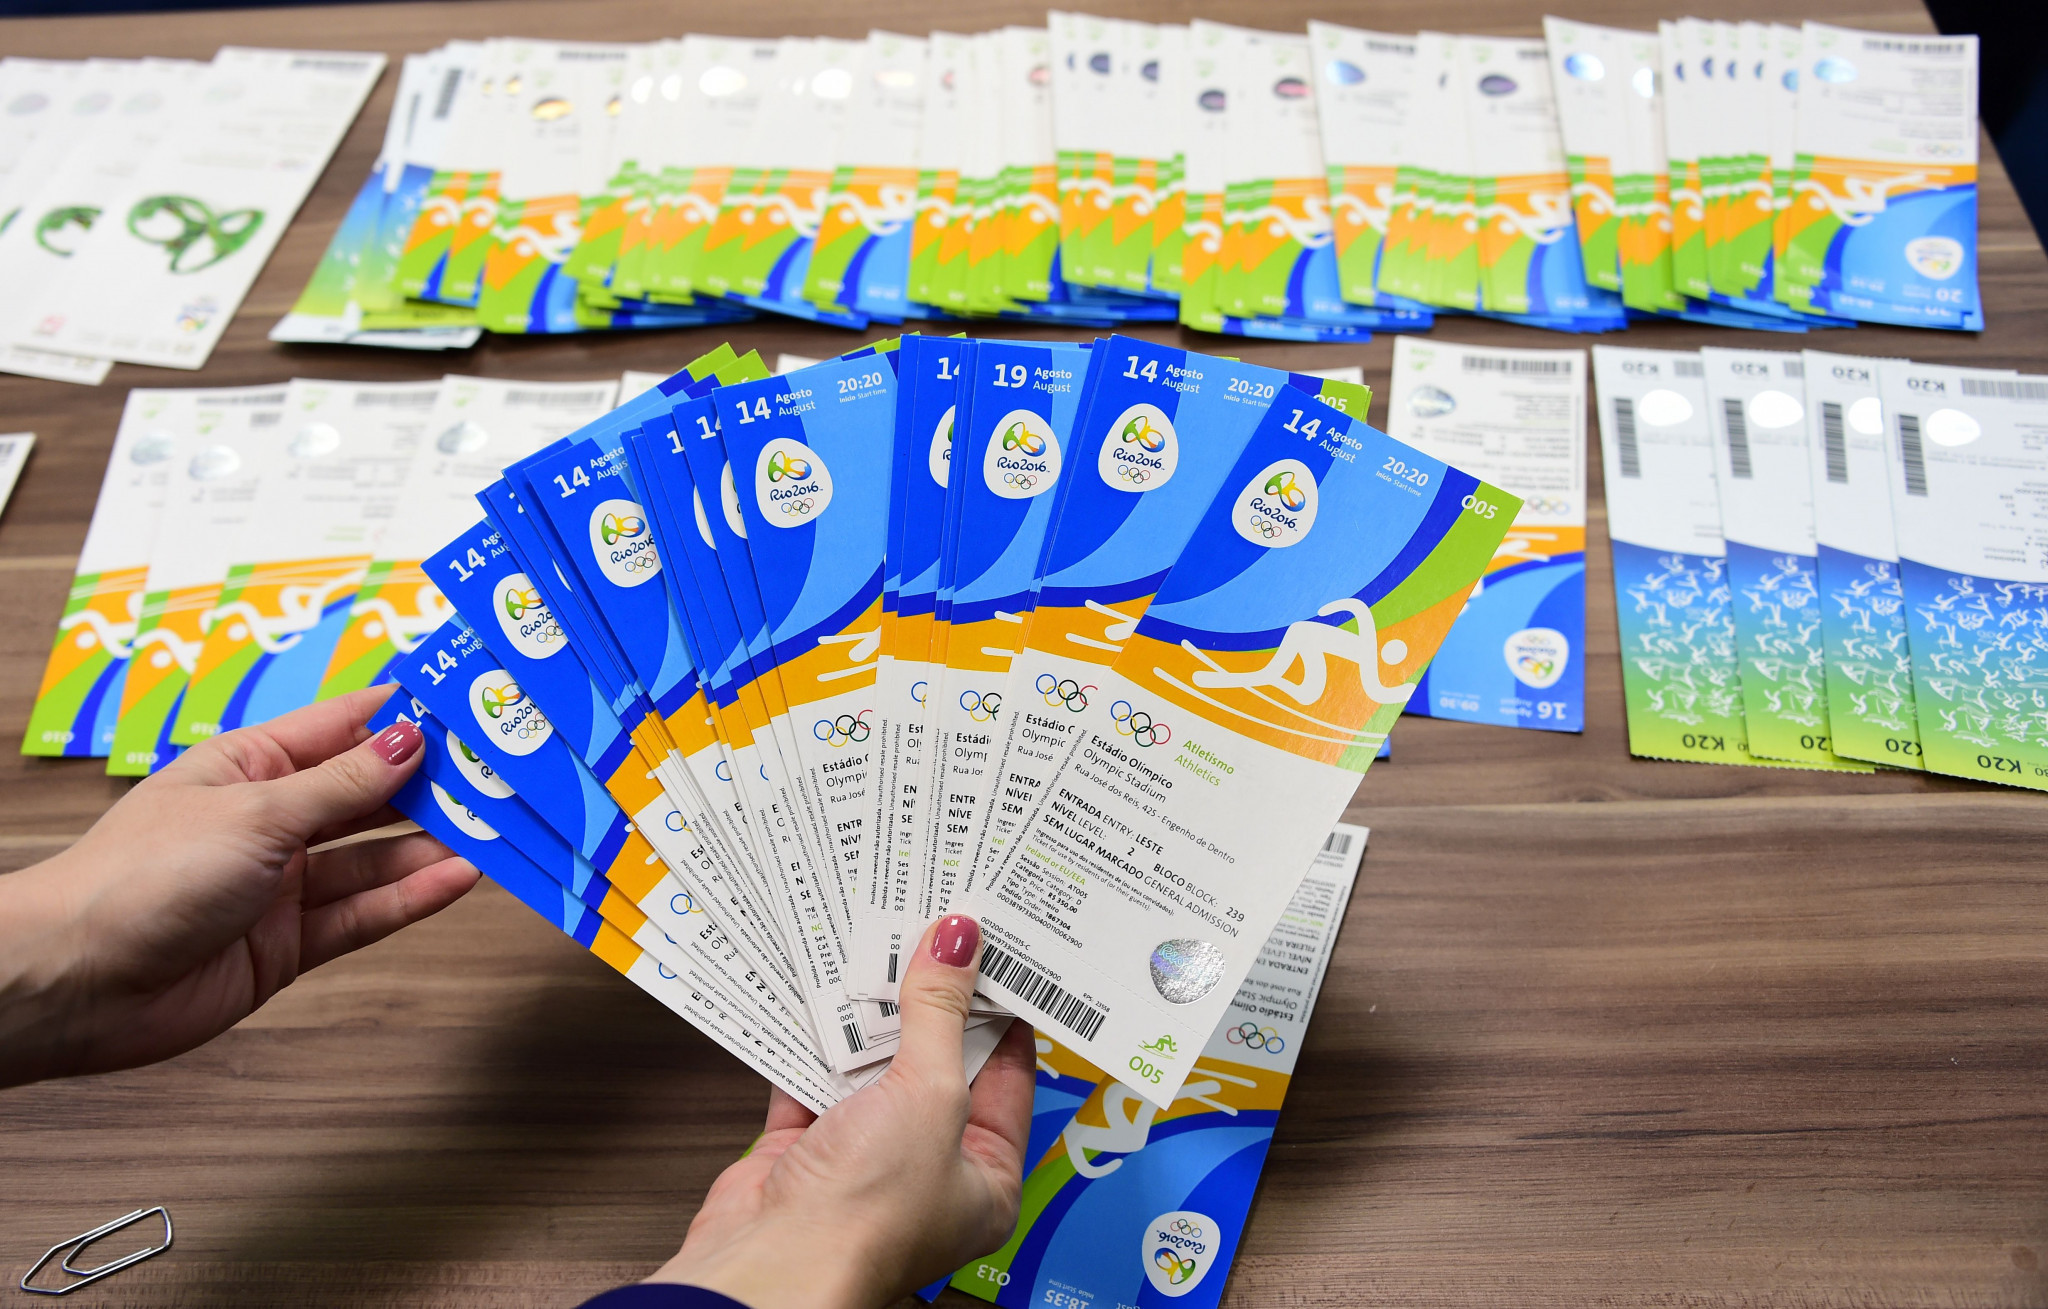 Tickets of the Rio 2016 Olympic Games seized from one of the directors of THG Sports, a company of international business events and information group Marcus Evans, at the centre of the case relating to Kevin Mallon and Patrick Hickey ©Getty Images